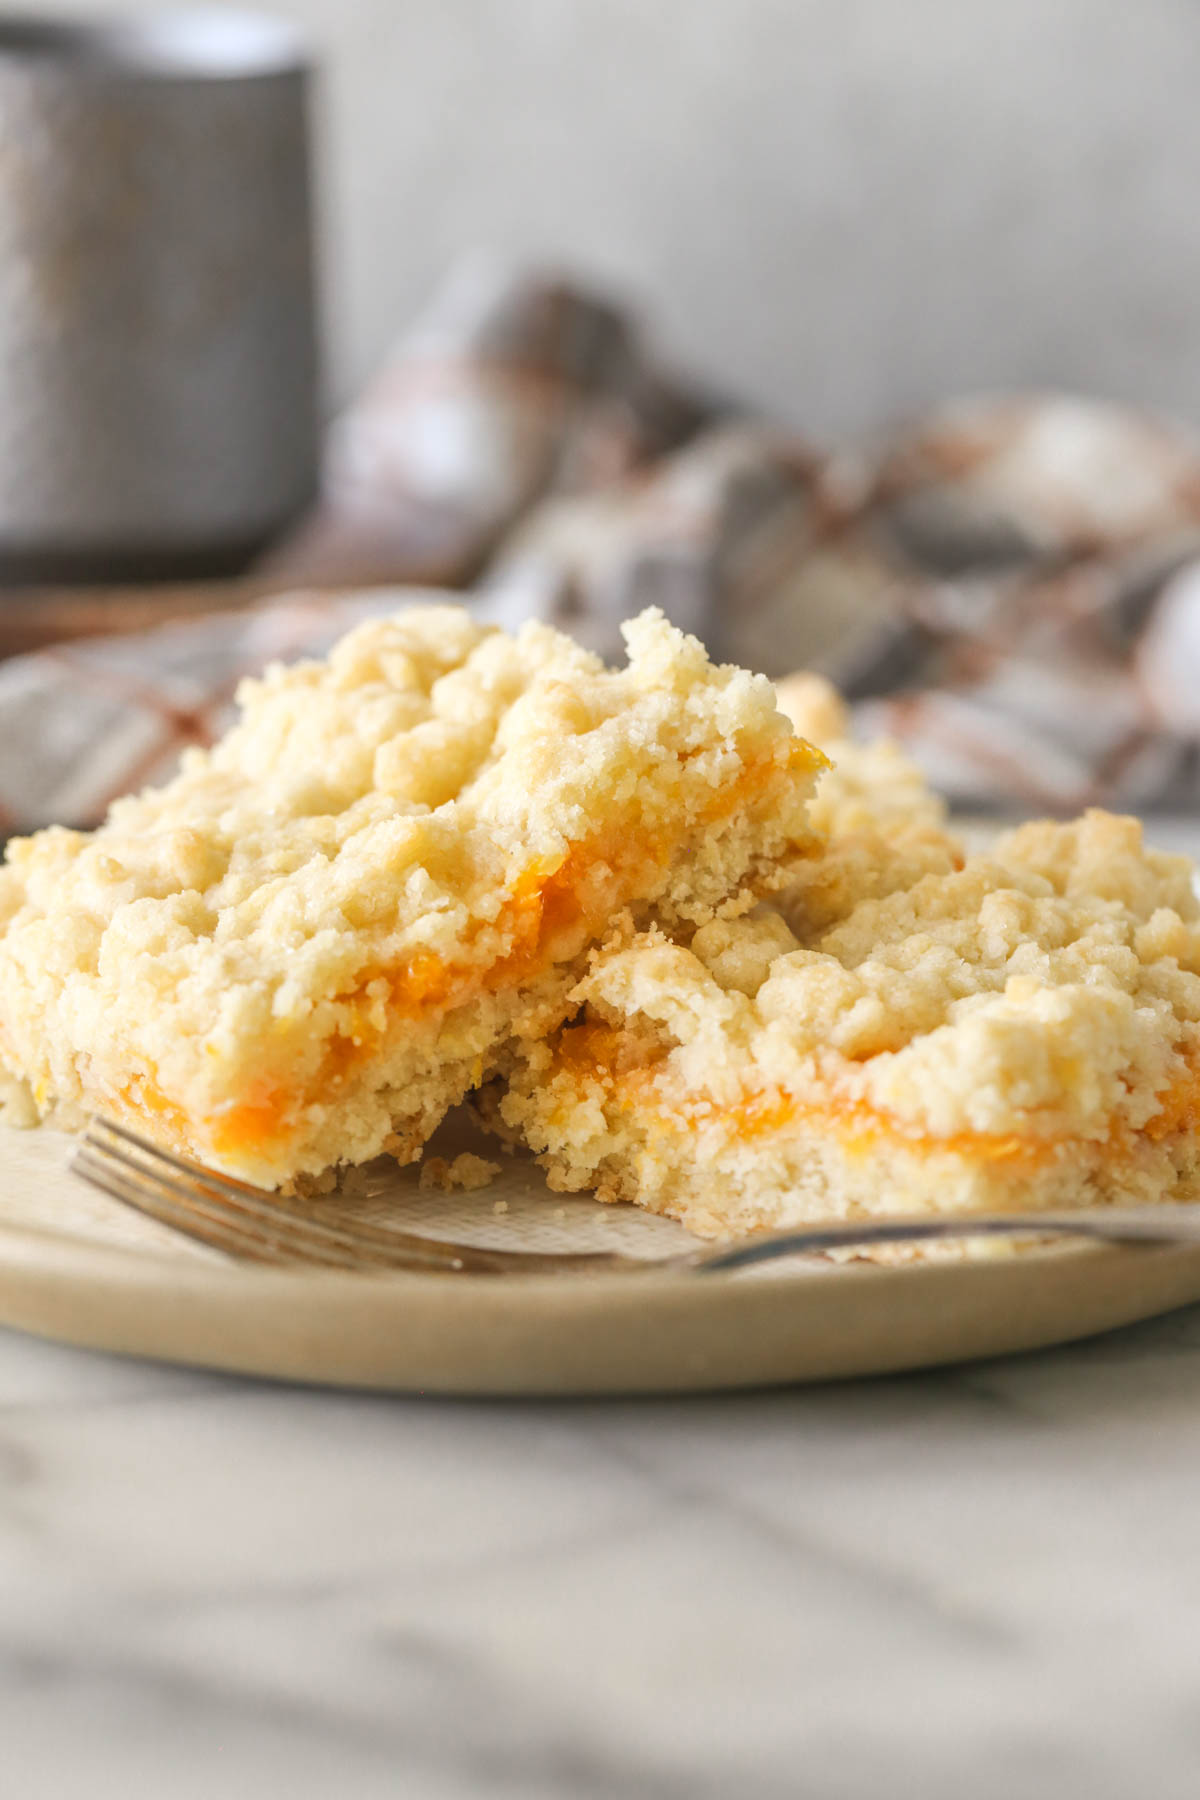 Three Peach Crumb Bar squares on a plate with a fork.  